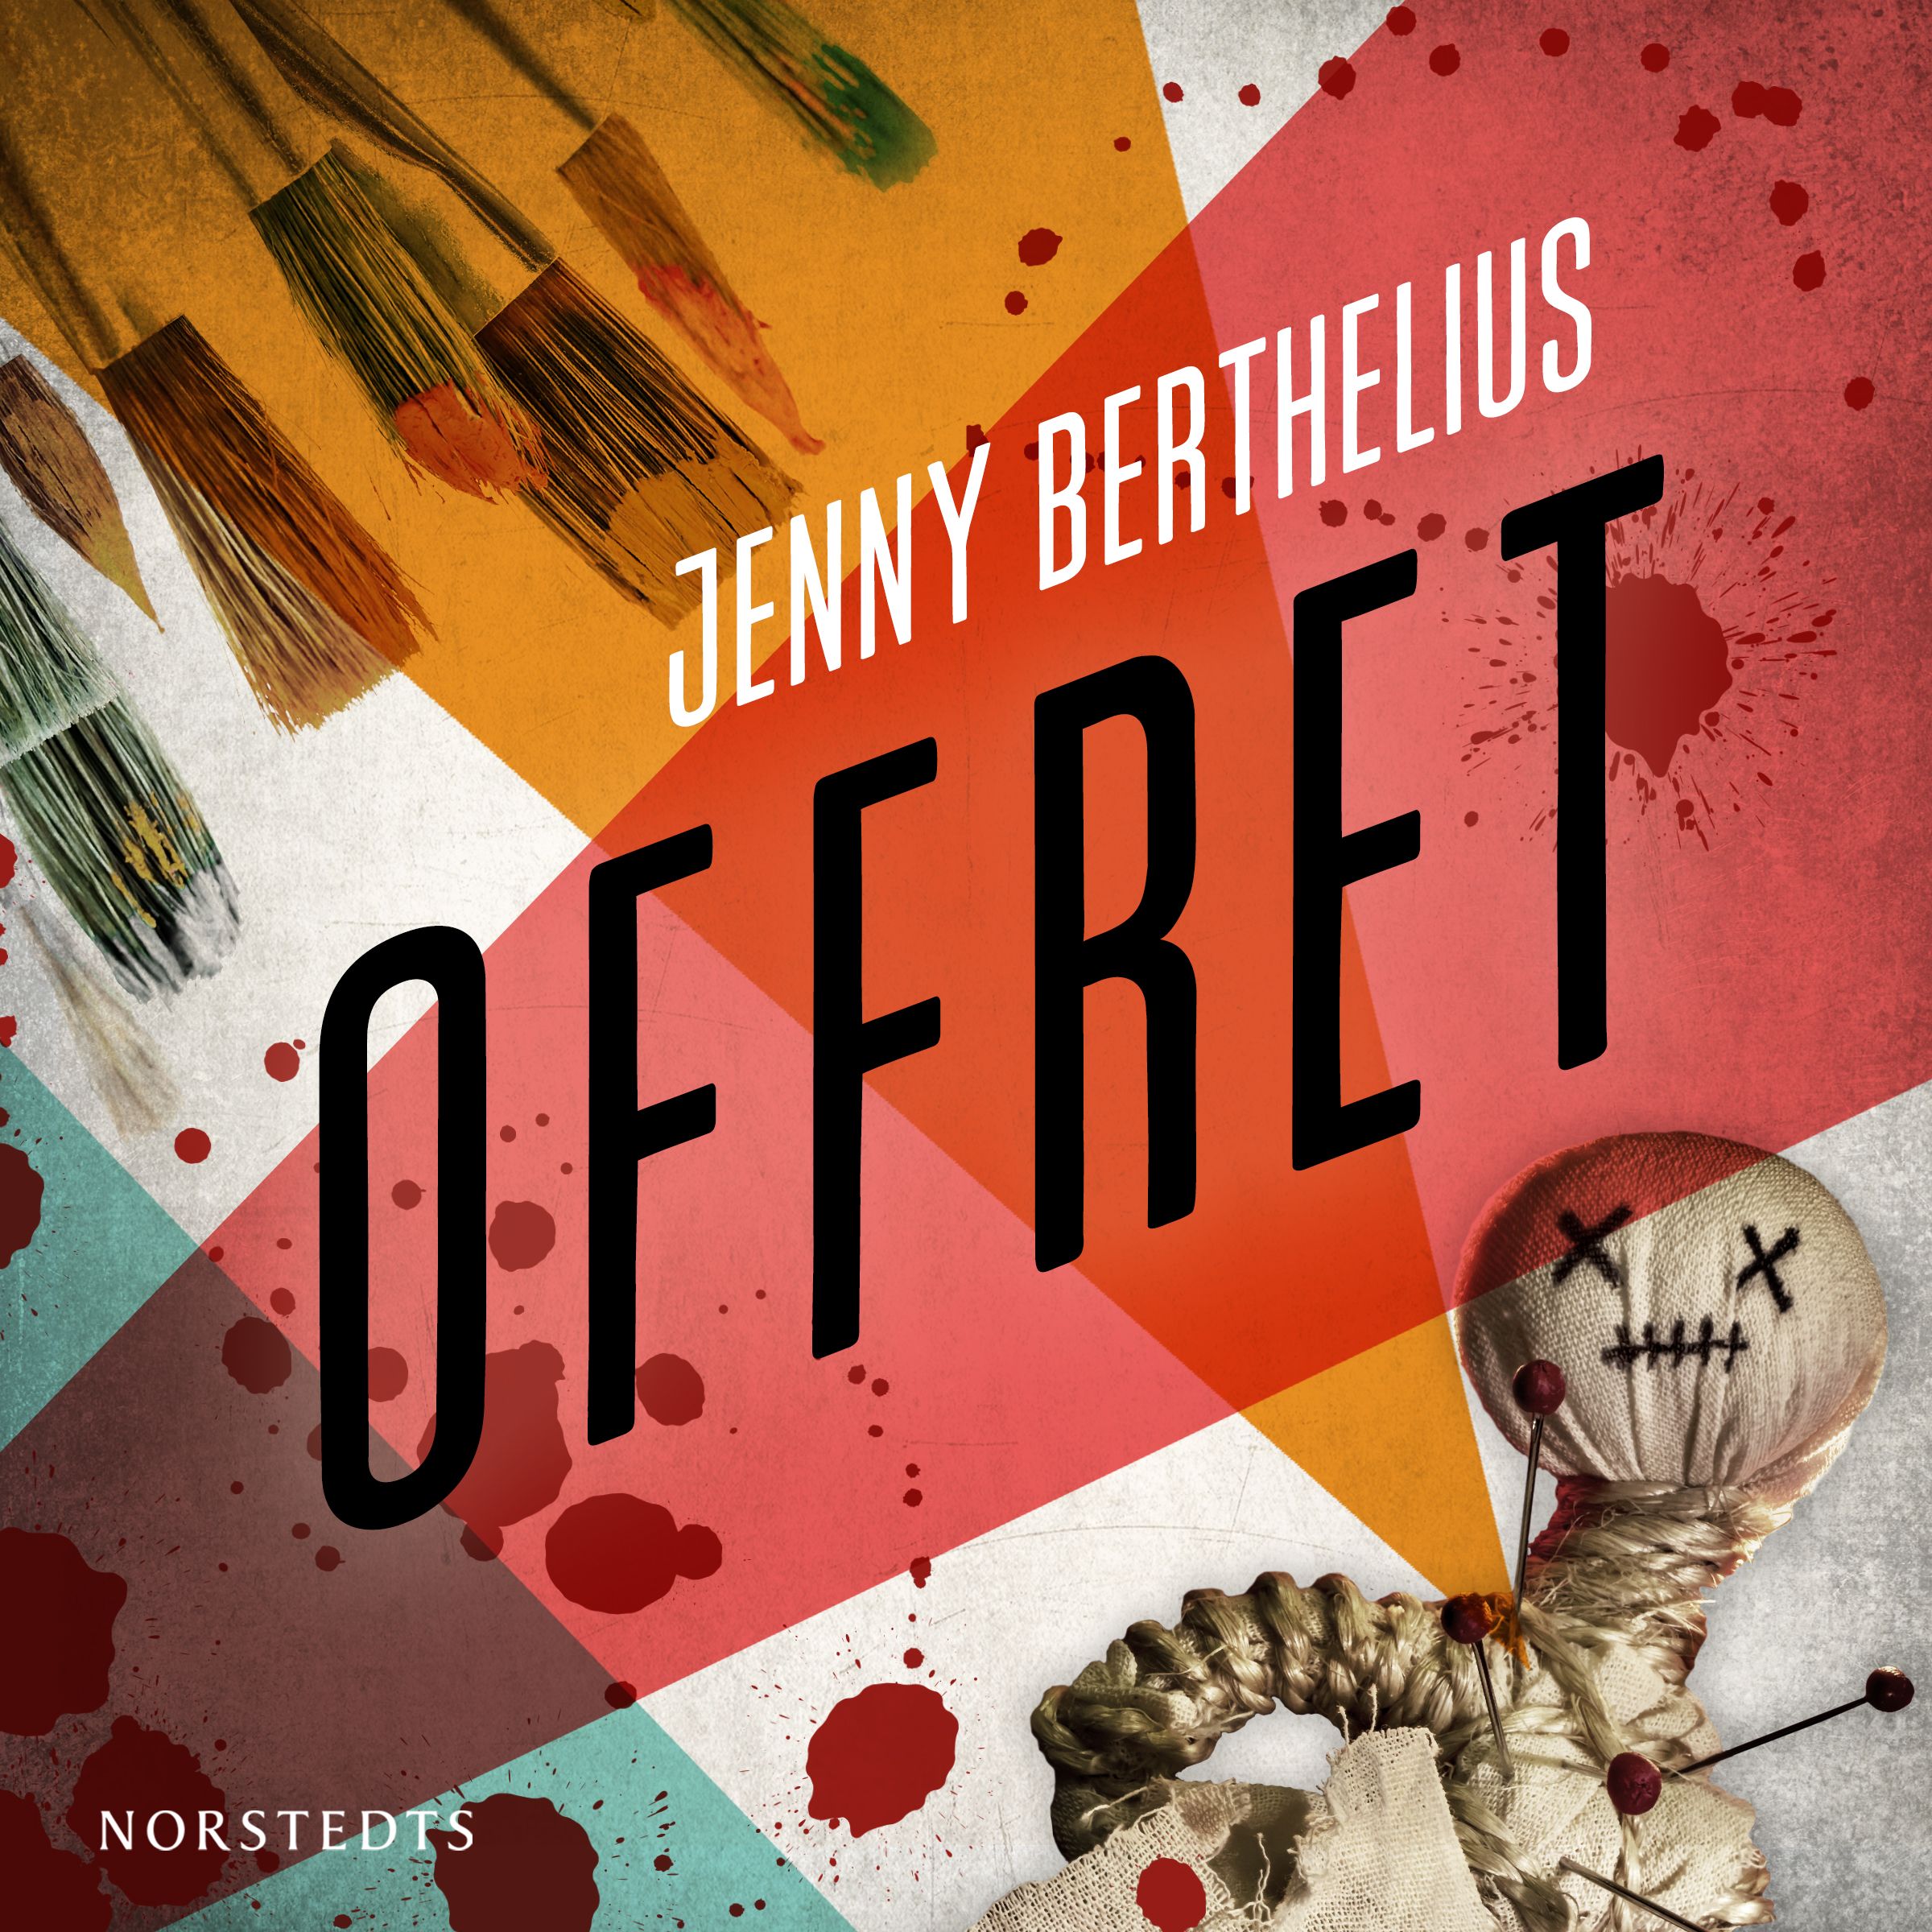 Offret, audiobook by Jenny Berthelius